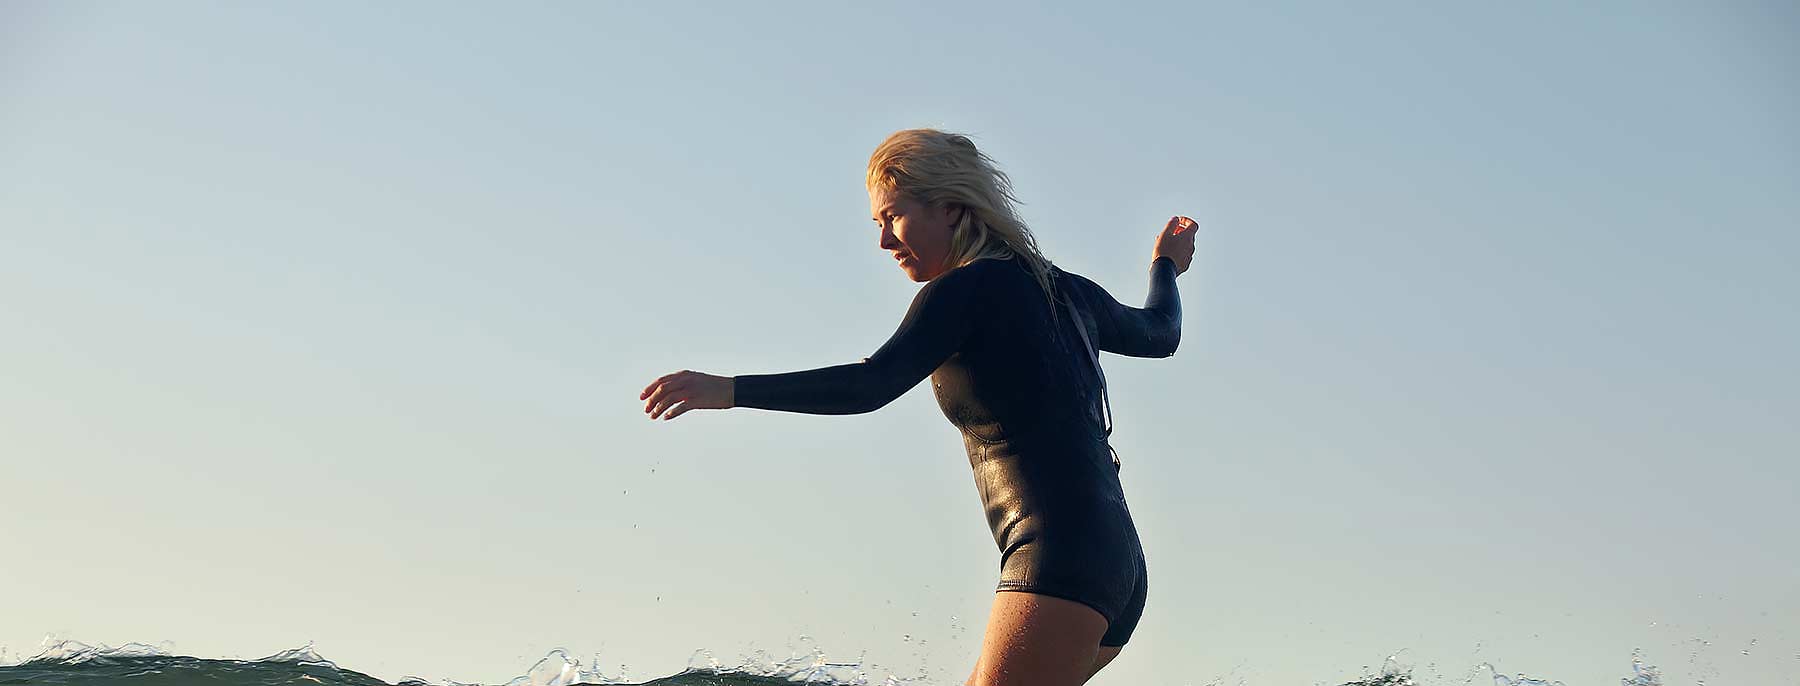 Womens Surfing Spring Suits